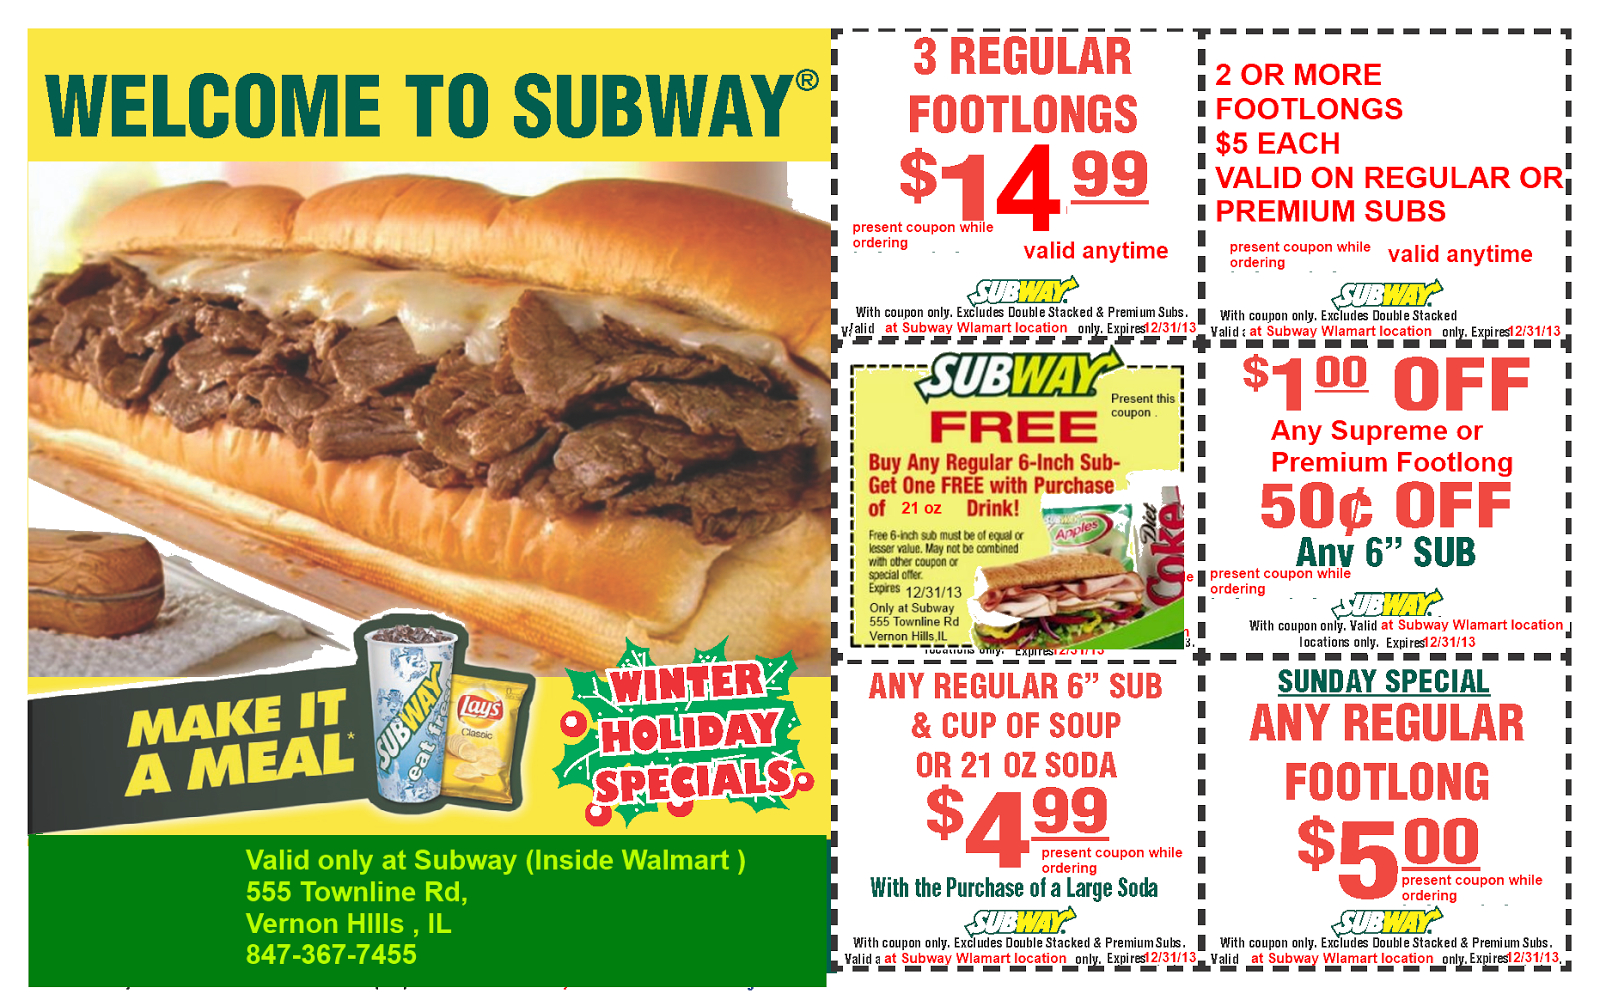 Subway Printable Coupons Aug 2018 : 17 Day Diet Freebies - Free Printable Subway Coupons 2017